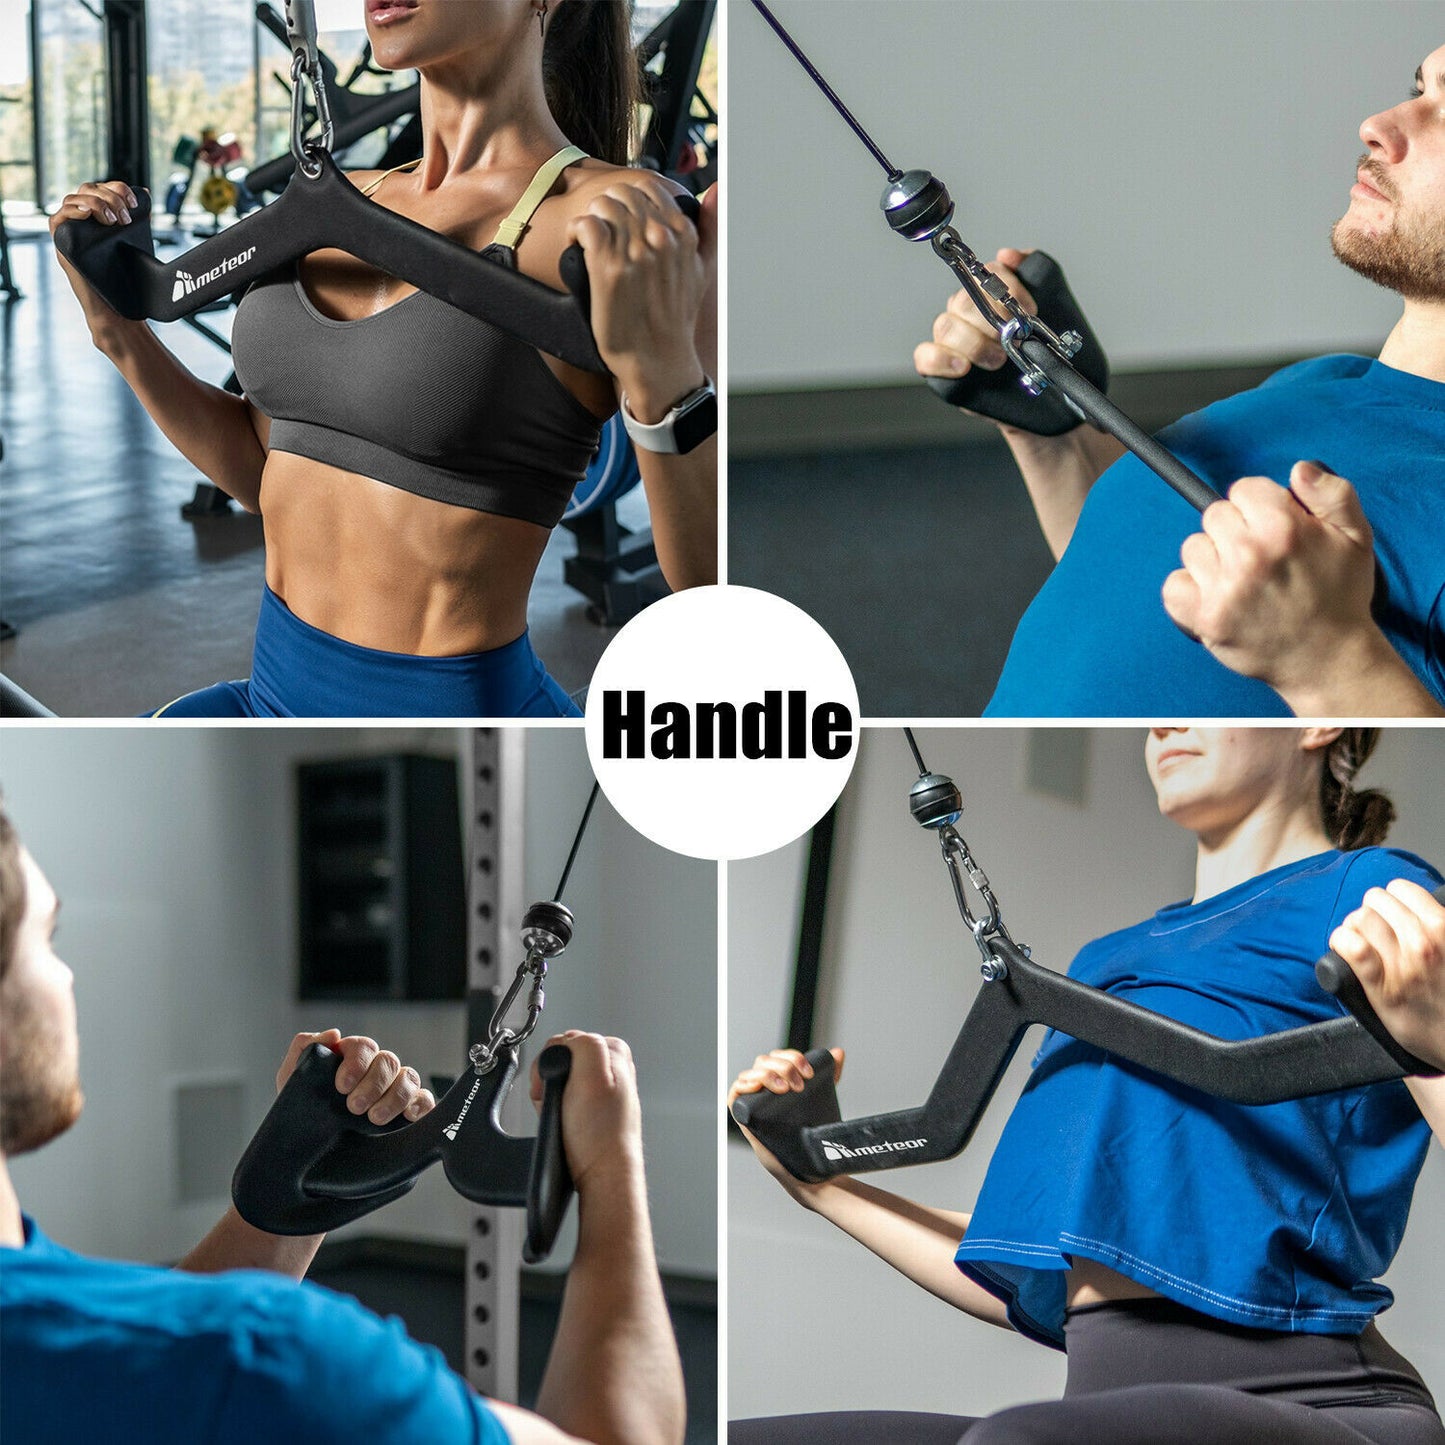 LAT Pull Down Bars Cable Machine Attachment, Rowing T-bar V-bar Set, Back Strength Training Handle Grips for Cable Machine Rowing Machine